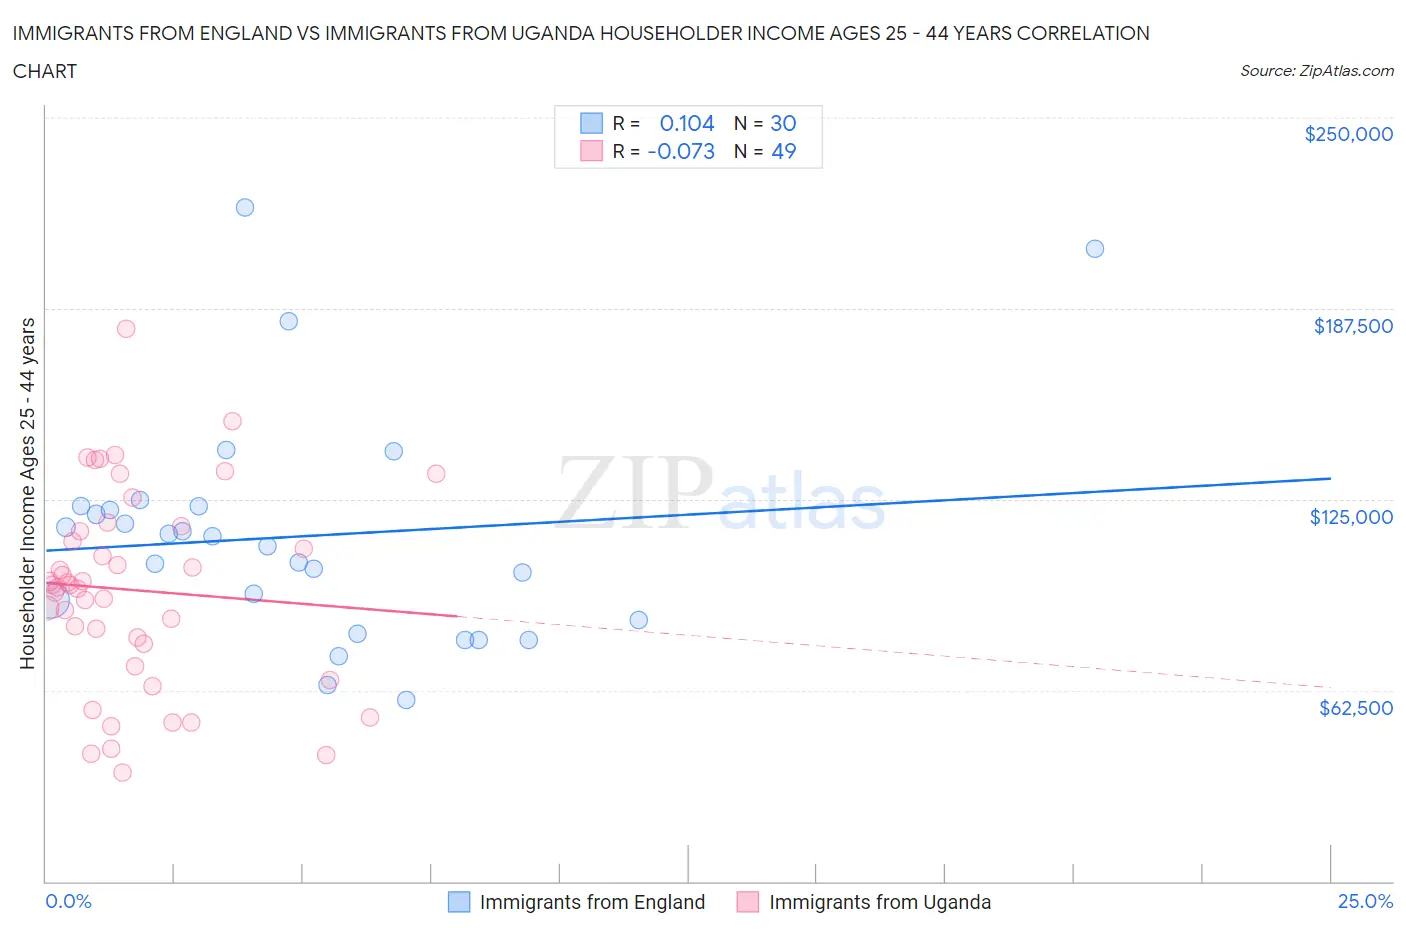 Immigrants from England vs Immigrants from Uganda Householder Income Ages 25 - 44 years